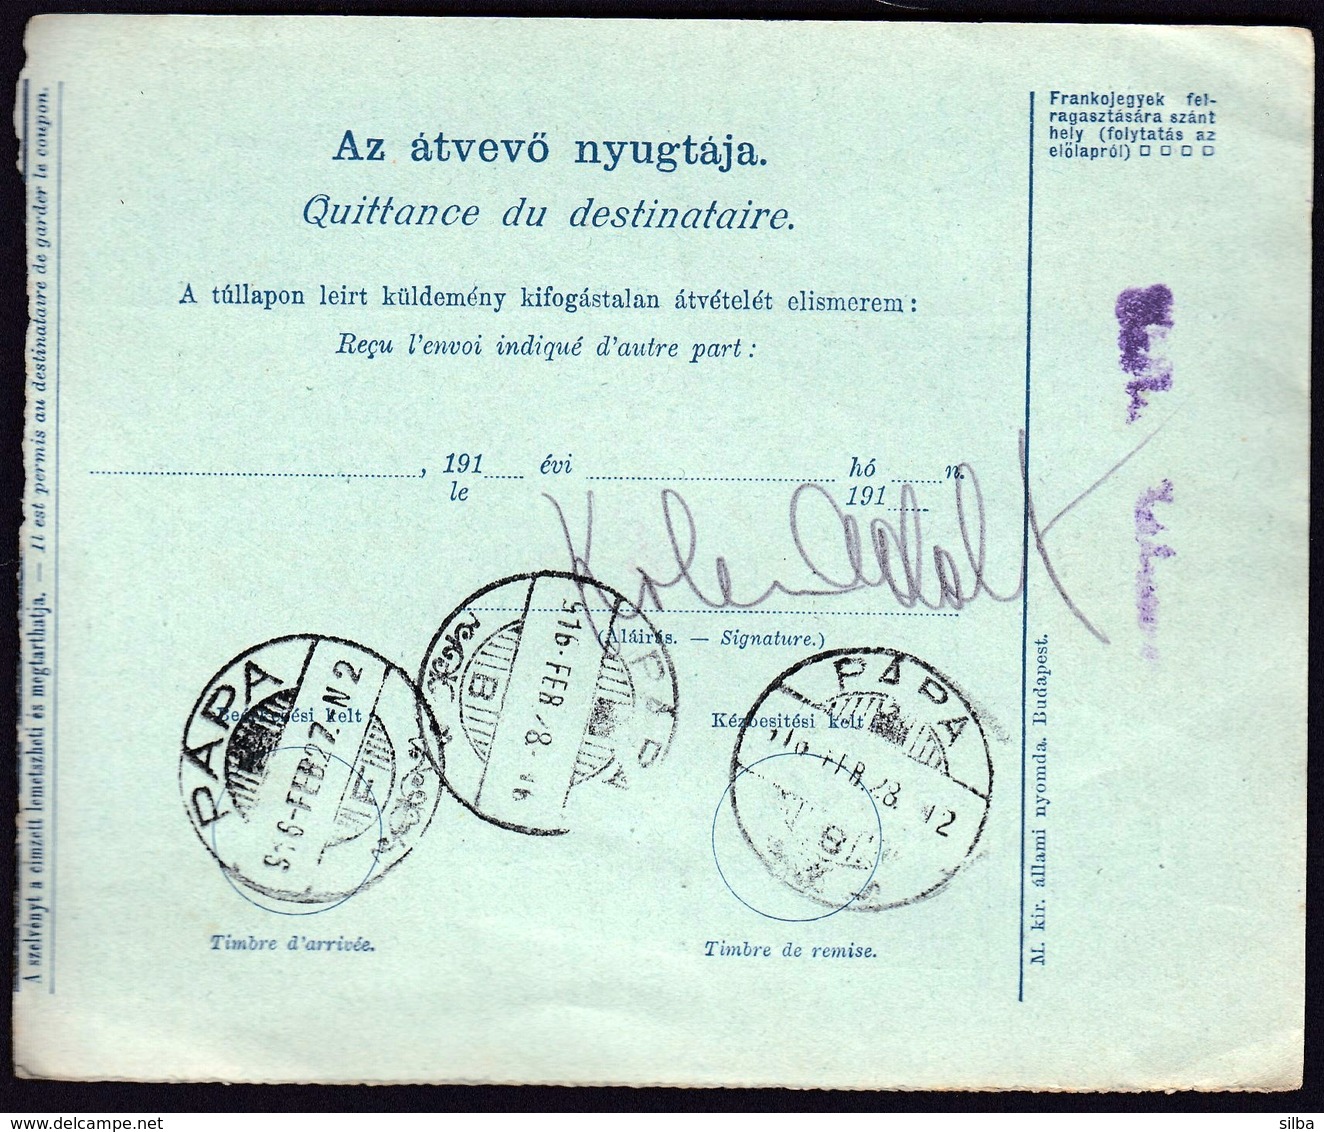 Hungary Tiszafured 1916 / Parcel Post, Postai Szallitolevel, Bulletin D' Expedition / To Papa - Parcel Post